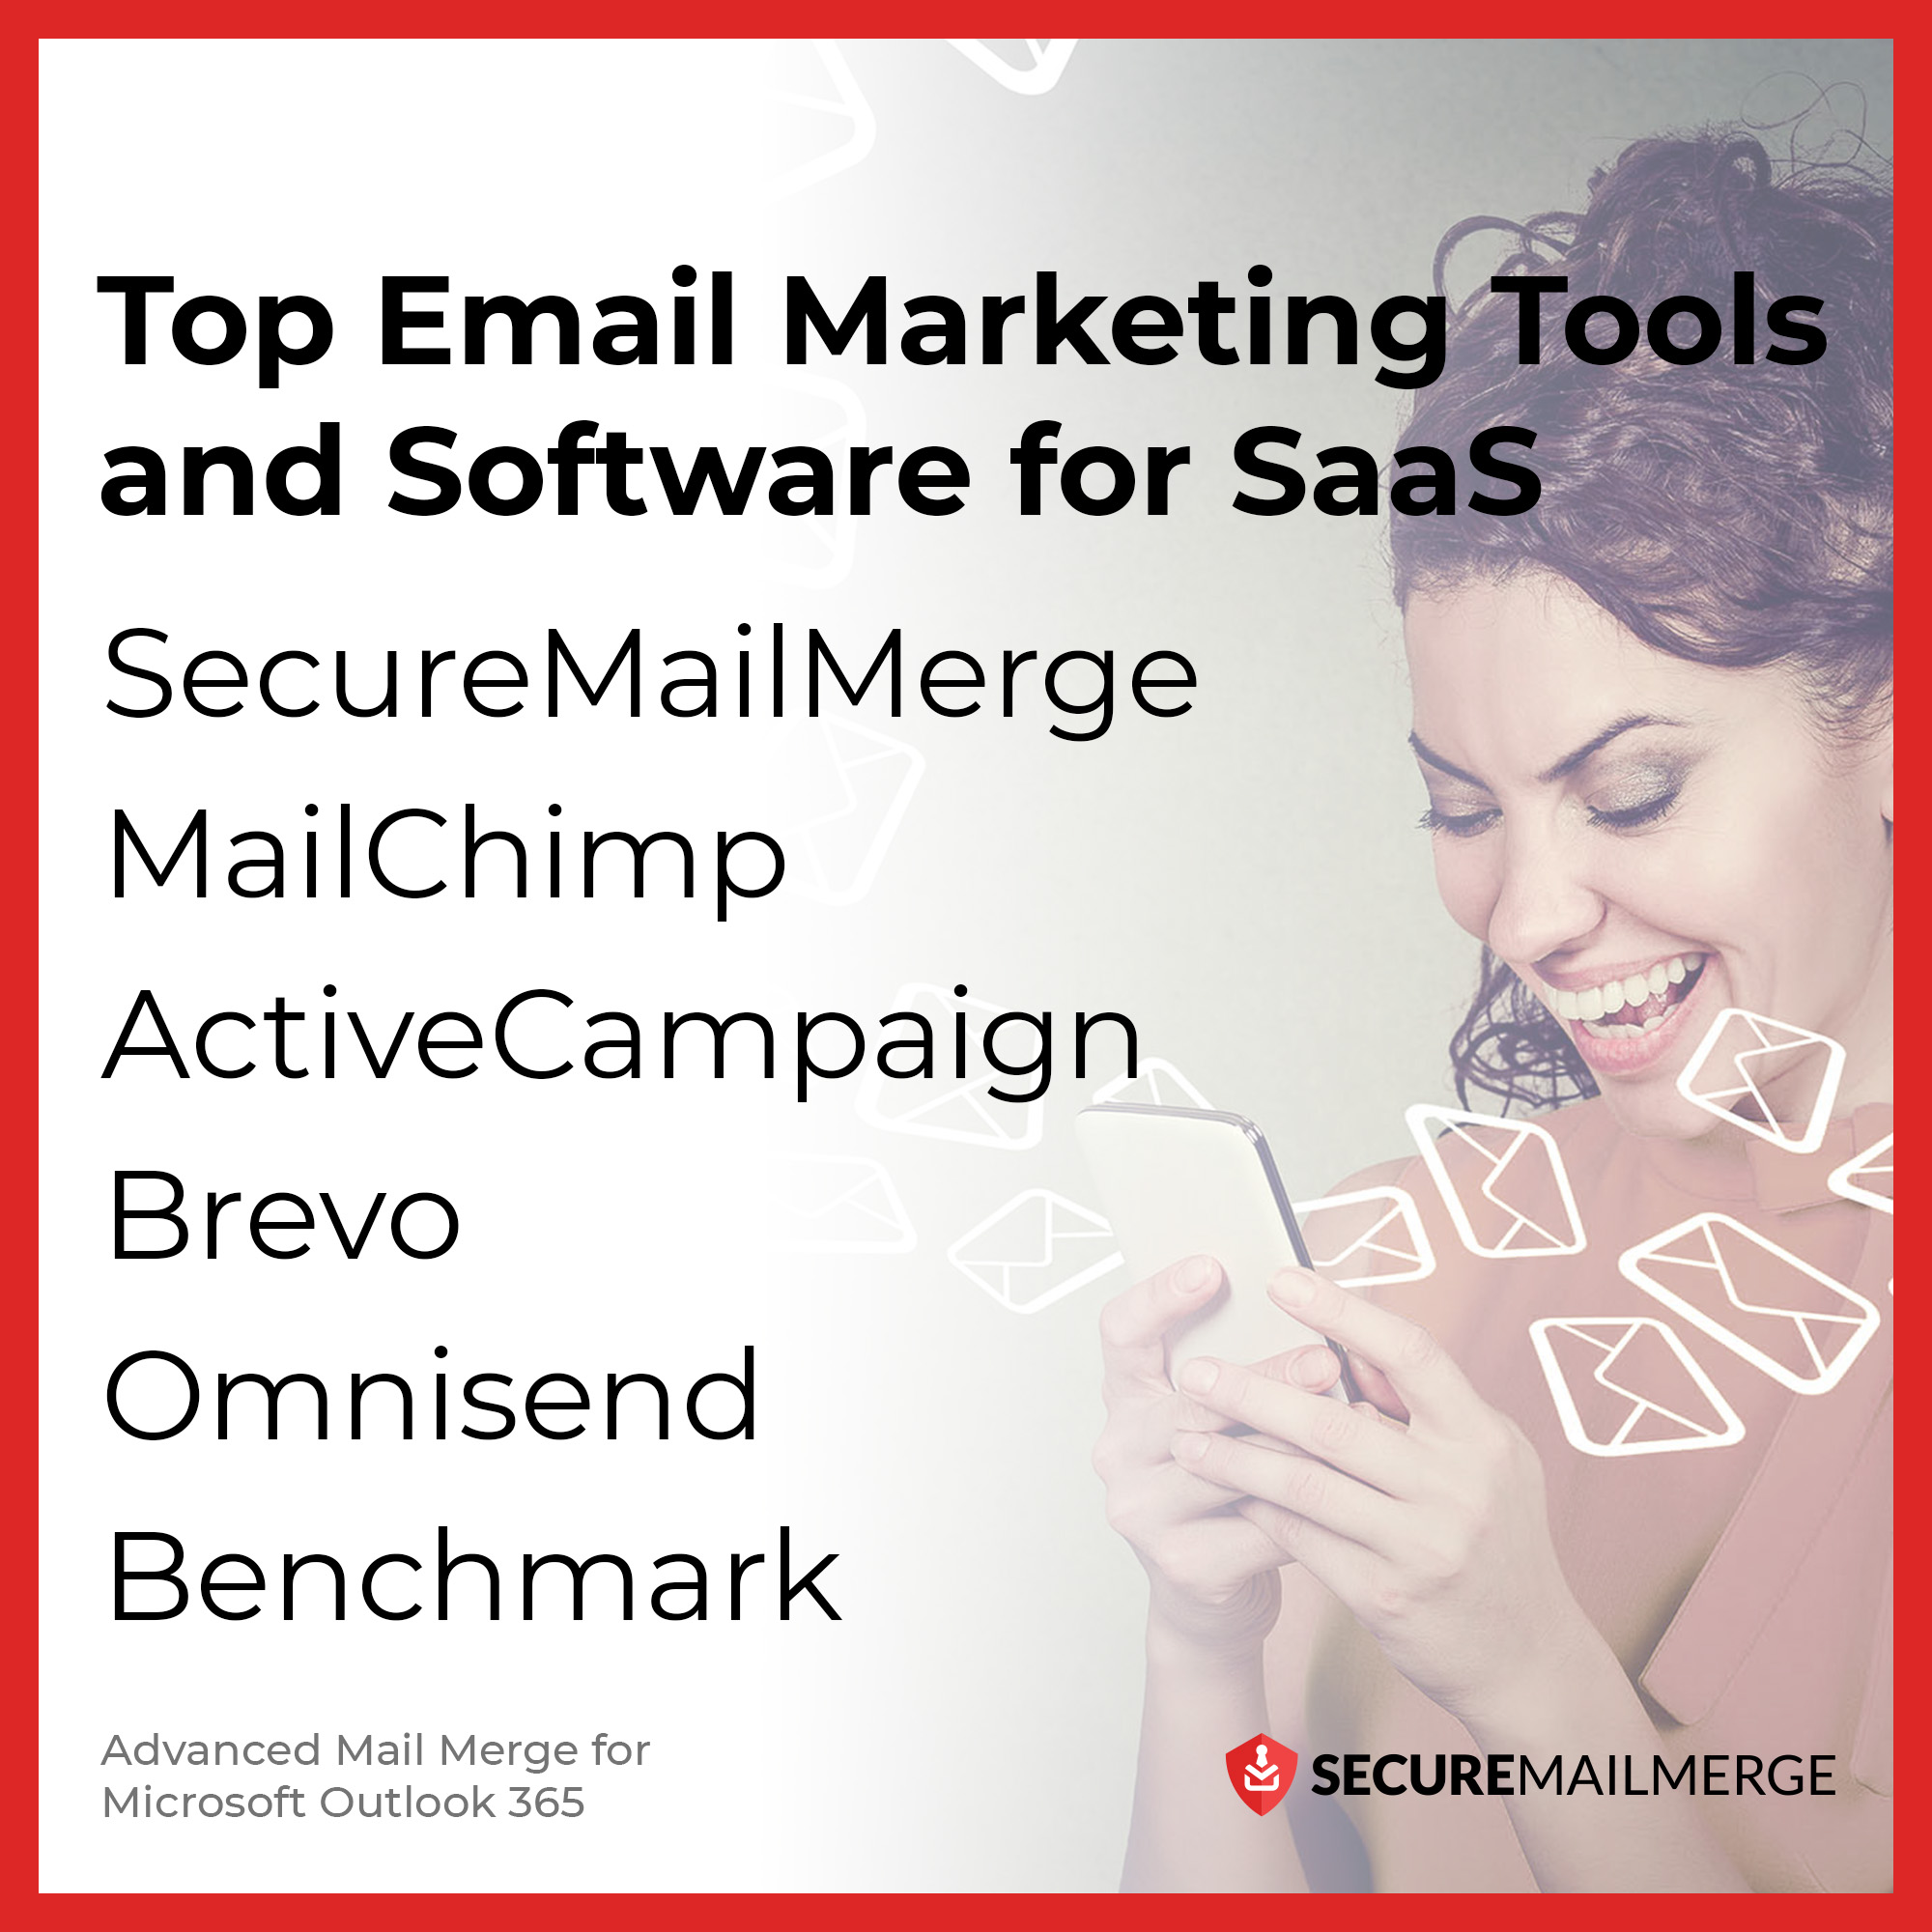 Top Email Marketing Tools and Software for SaaS